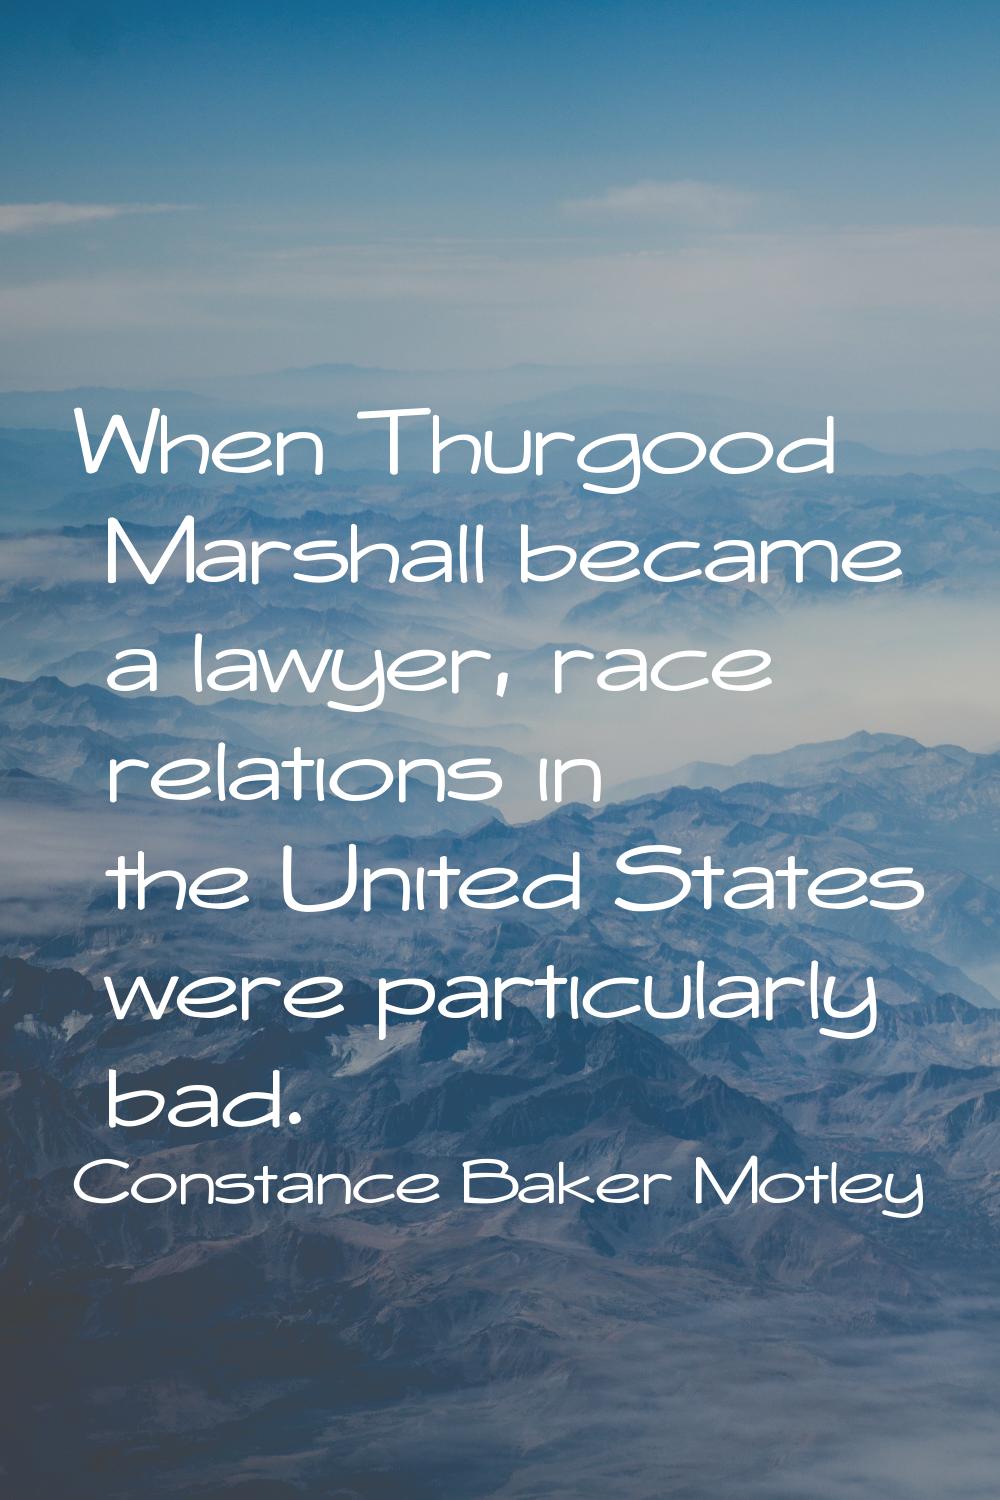 When Thurgood Marshall became a lawyer, race relations in the United States were particularly bad.